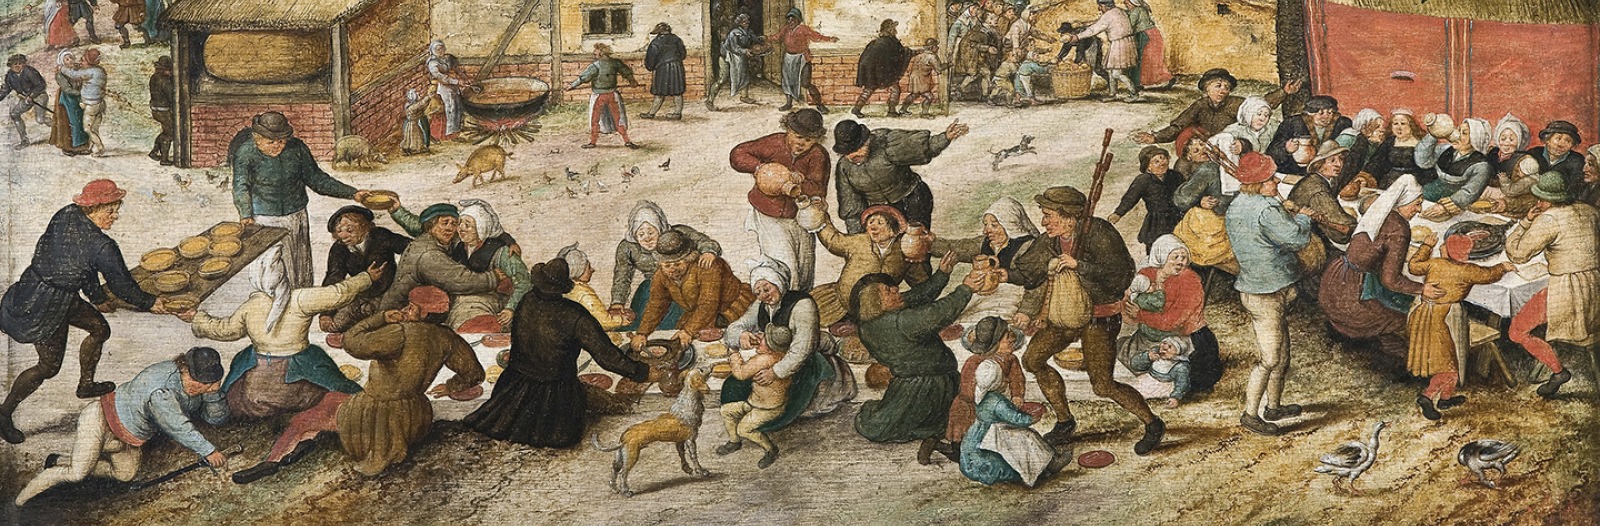 Painting of a peasant wedding feast outdoors